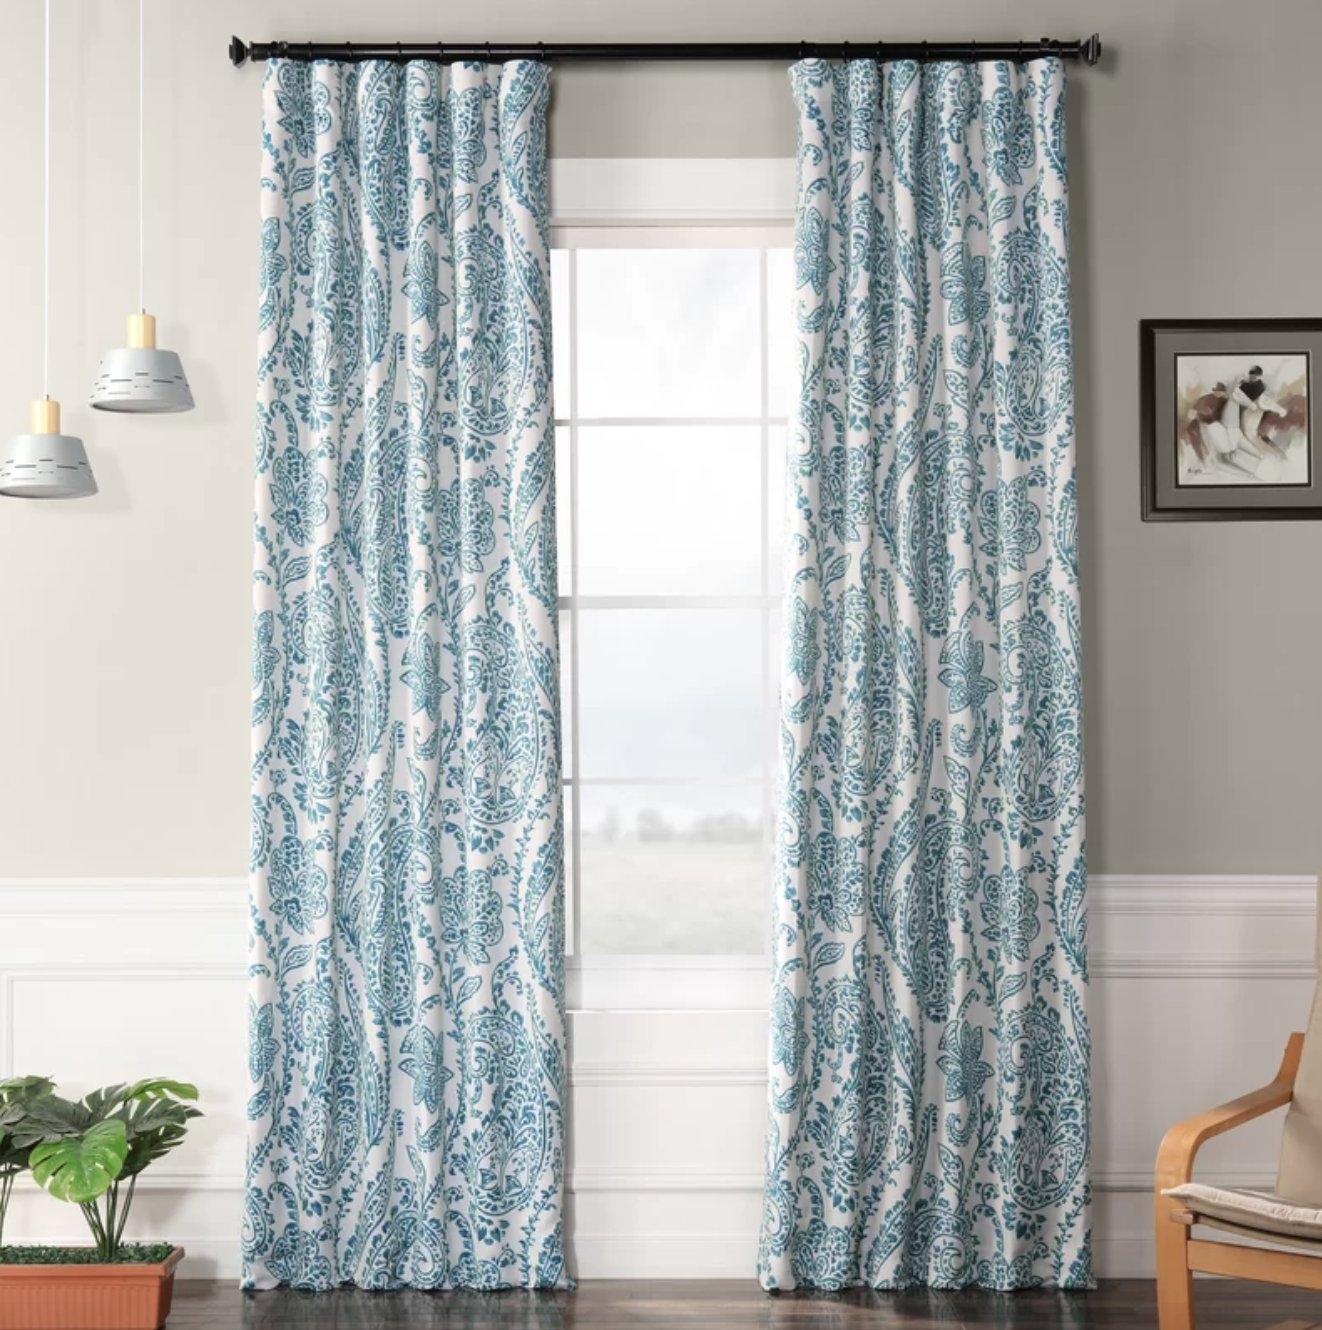 Bryton Paisley Synthetic Blackout Thermal Rod Pocket Single Curtain Panel - 120" Tea Time Teal - Image 1